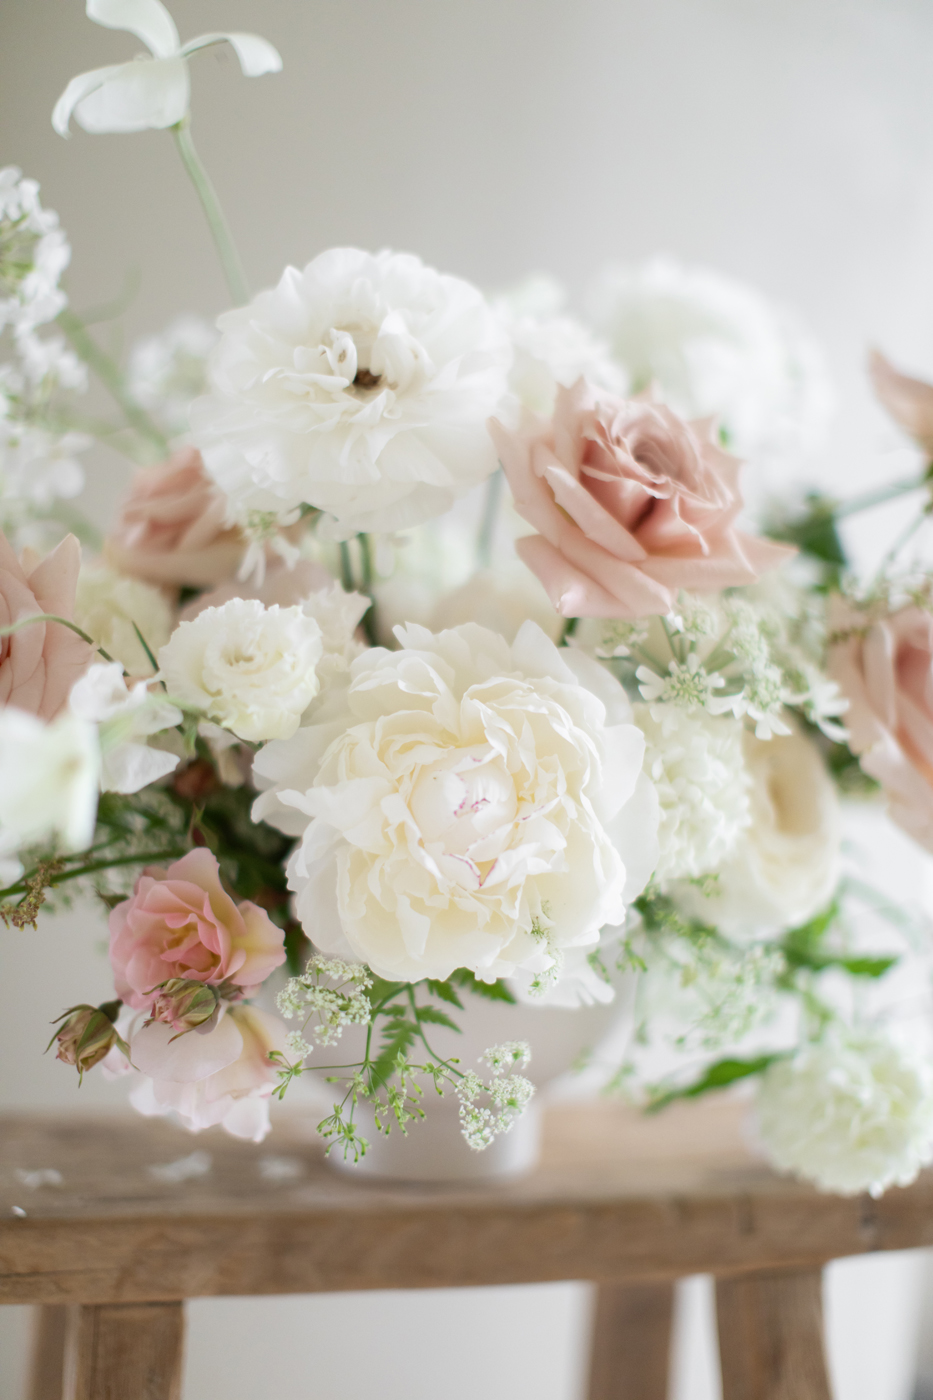 Timeless and romantic wedding flowers